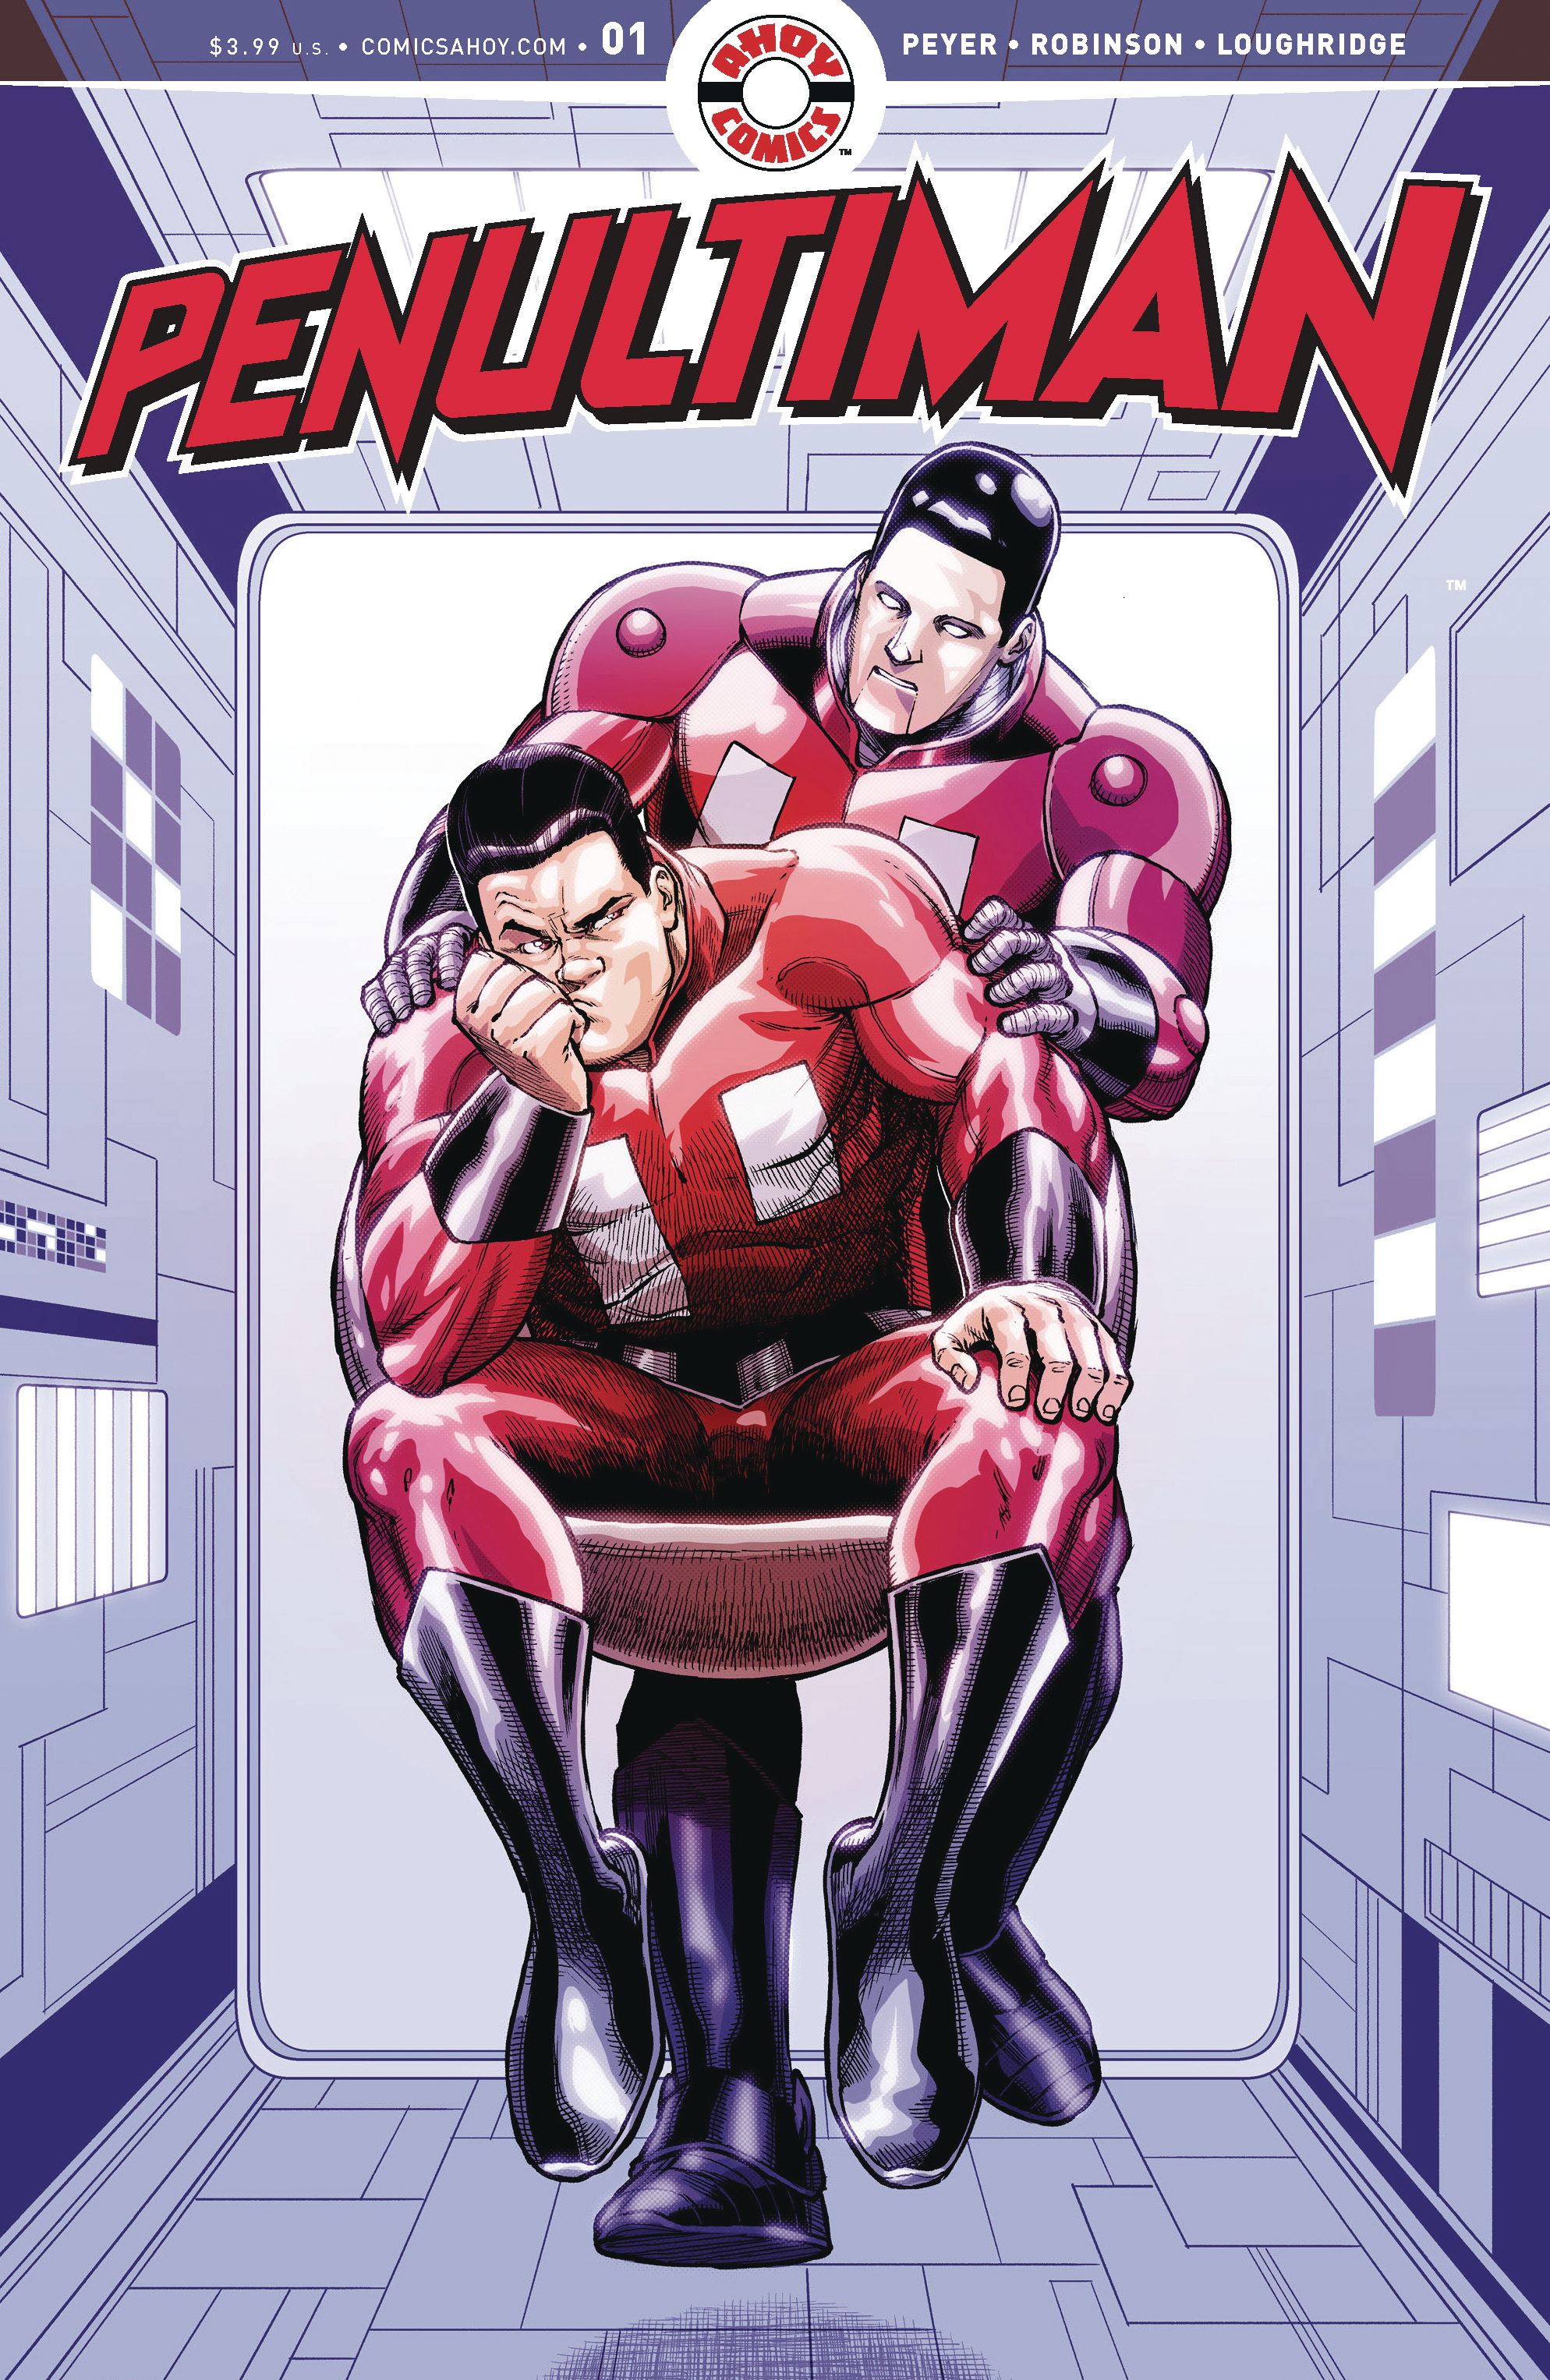 Penultiman #1 Cover A Robinson (Of 5)